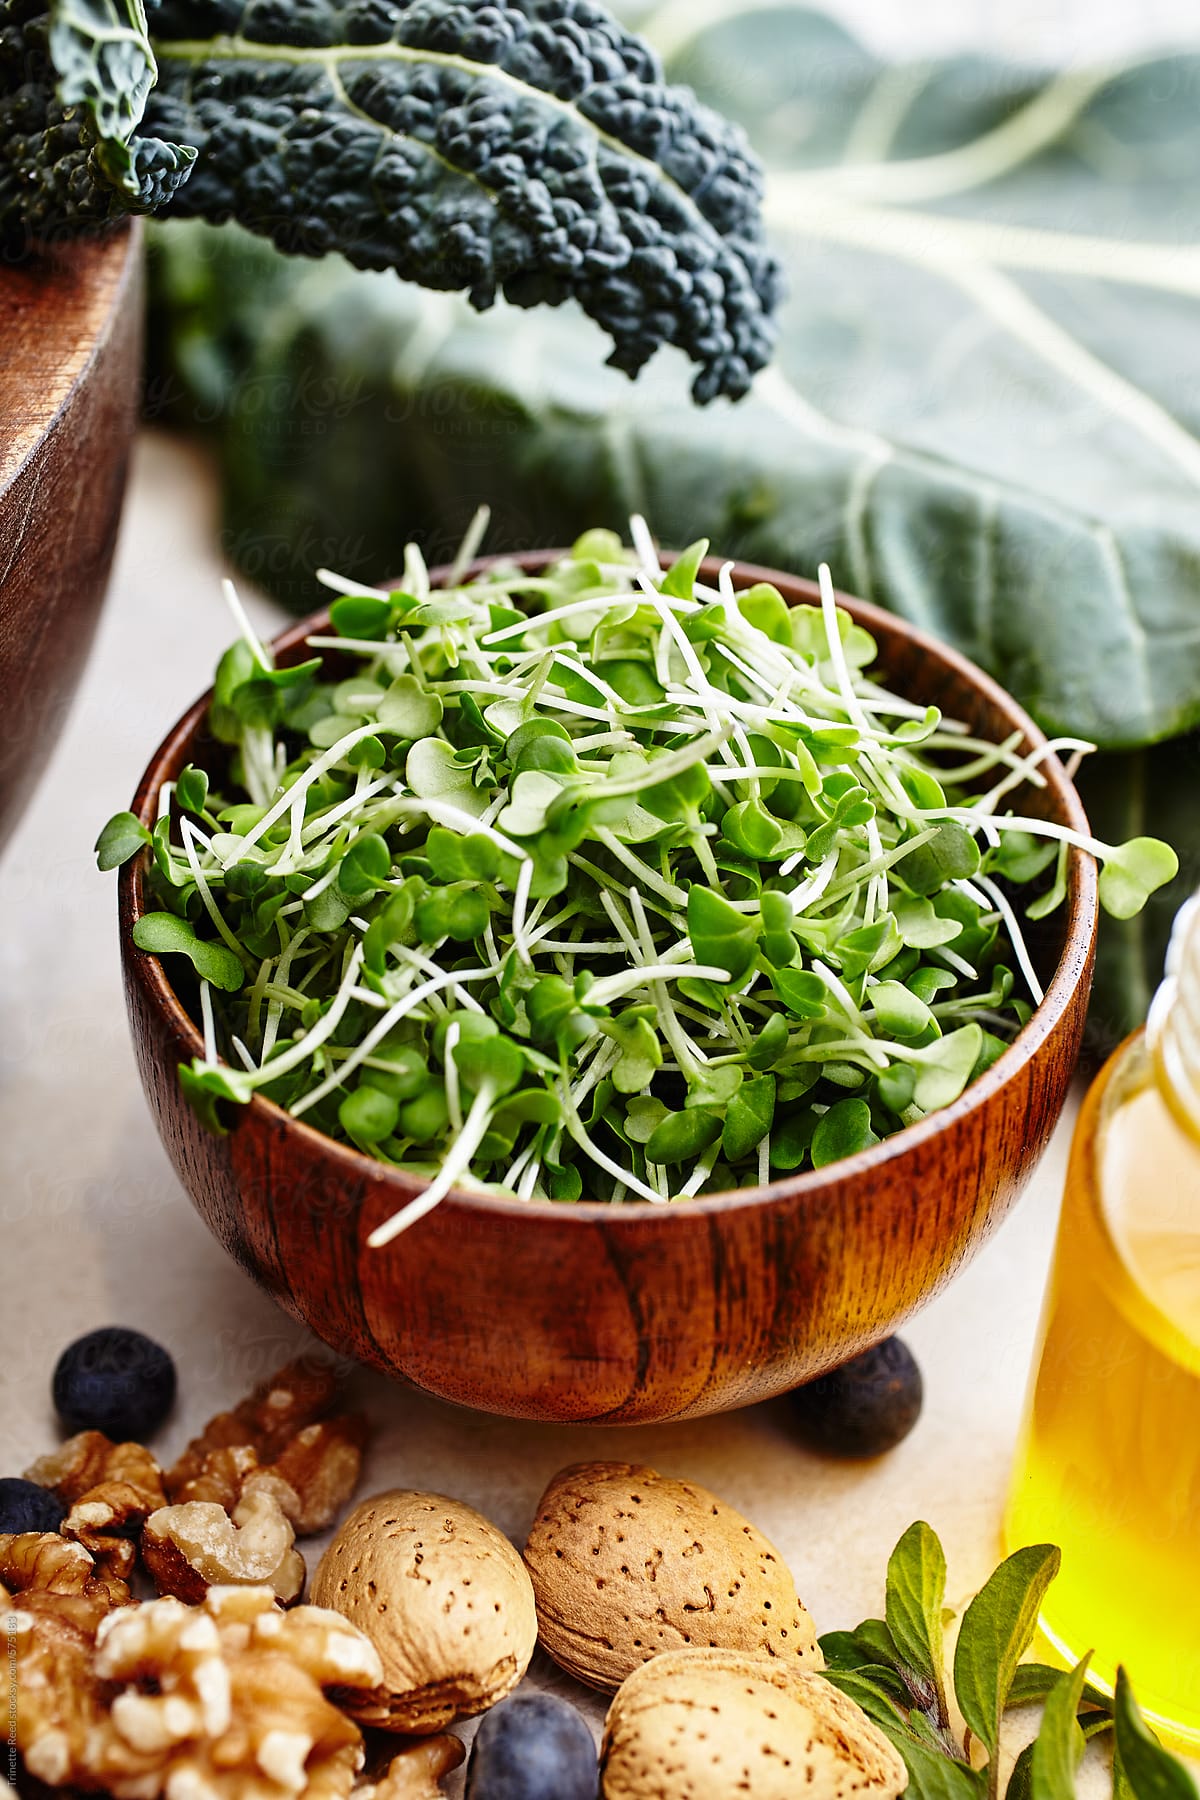 Broccoli sprouts with other superfoods